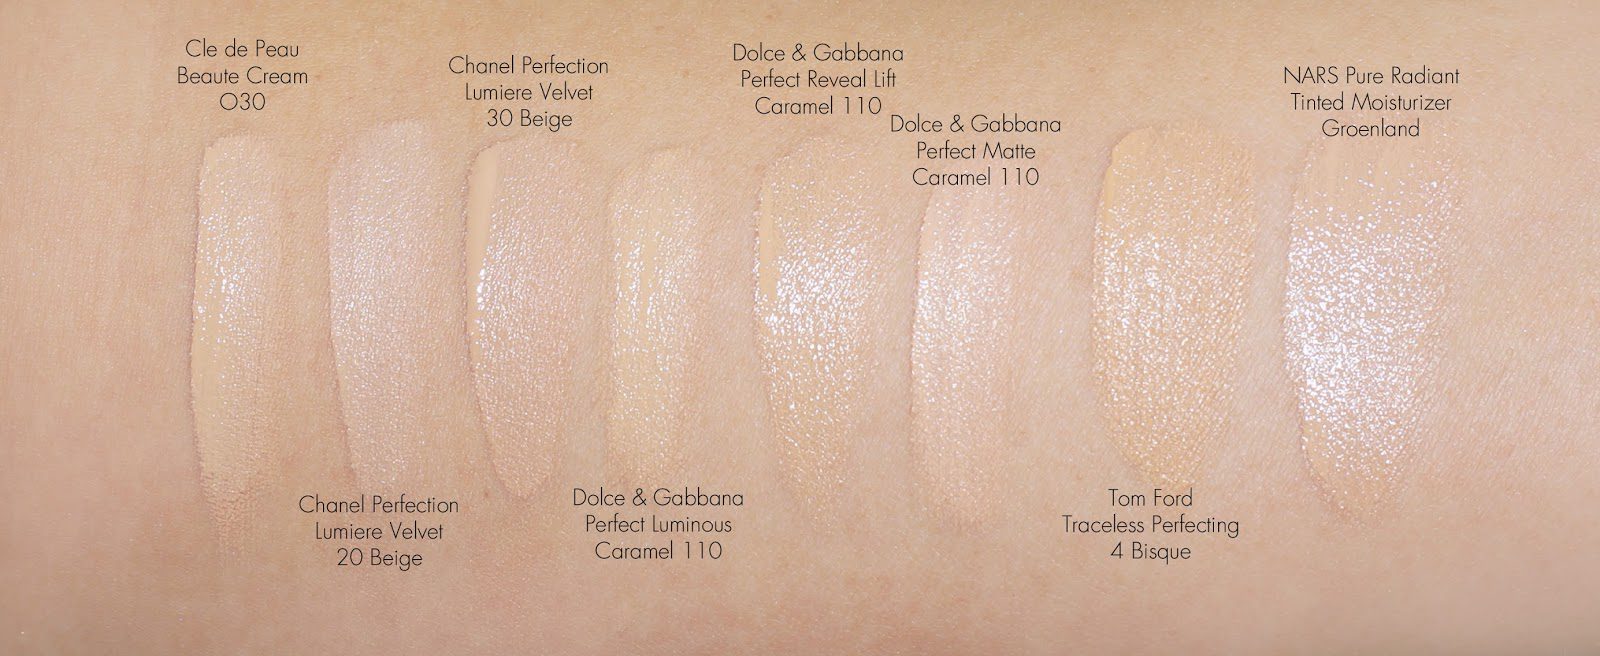 Lancome Absolue Foundation Color Chart